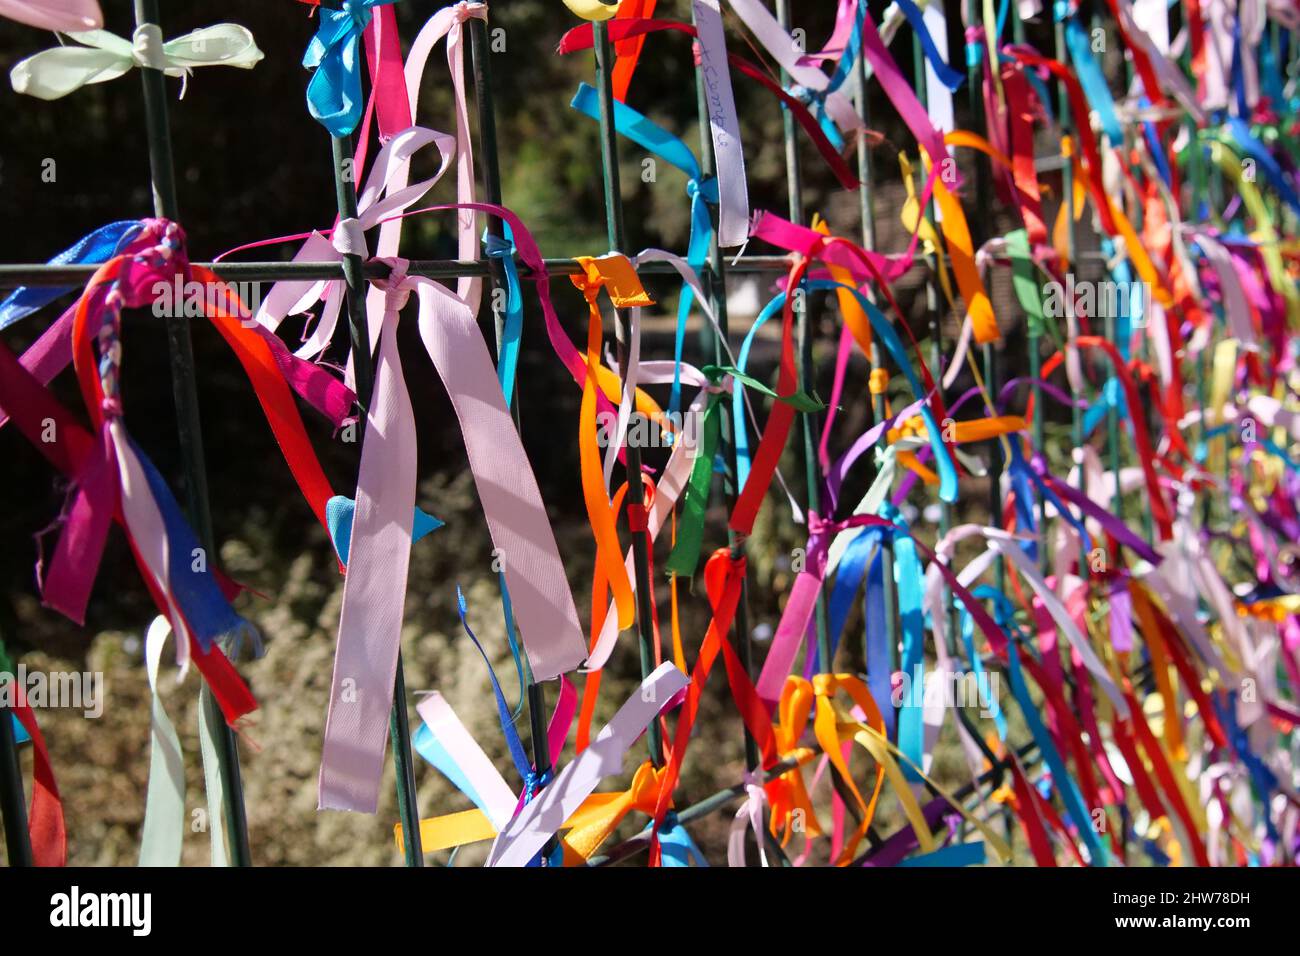 Colourful strings tied to a fence. Some of the strings have messages written on them. The background is intentionally out of focus or blurred. Stock Photo